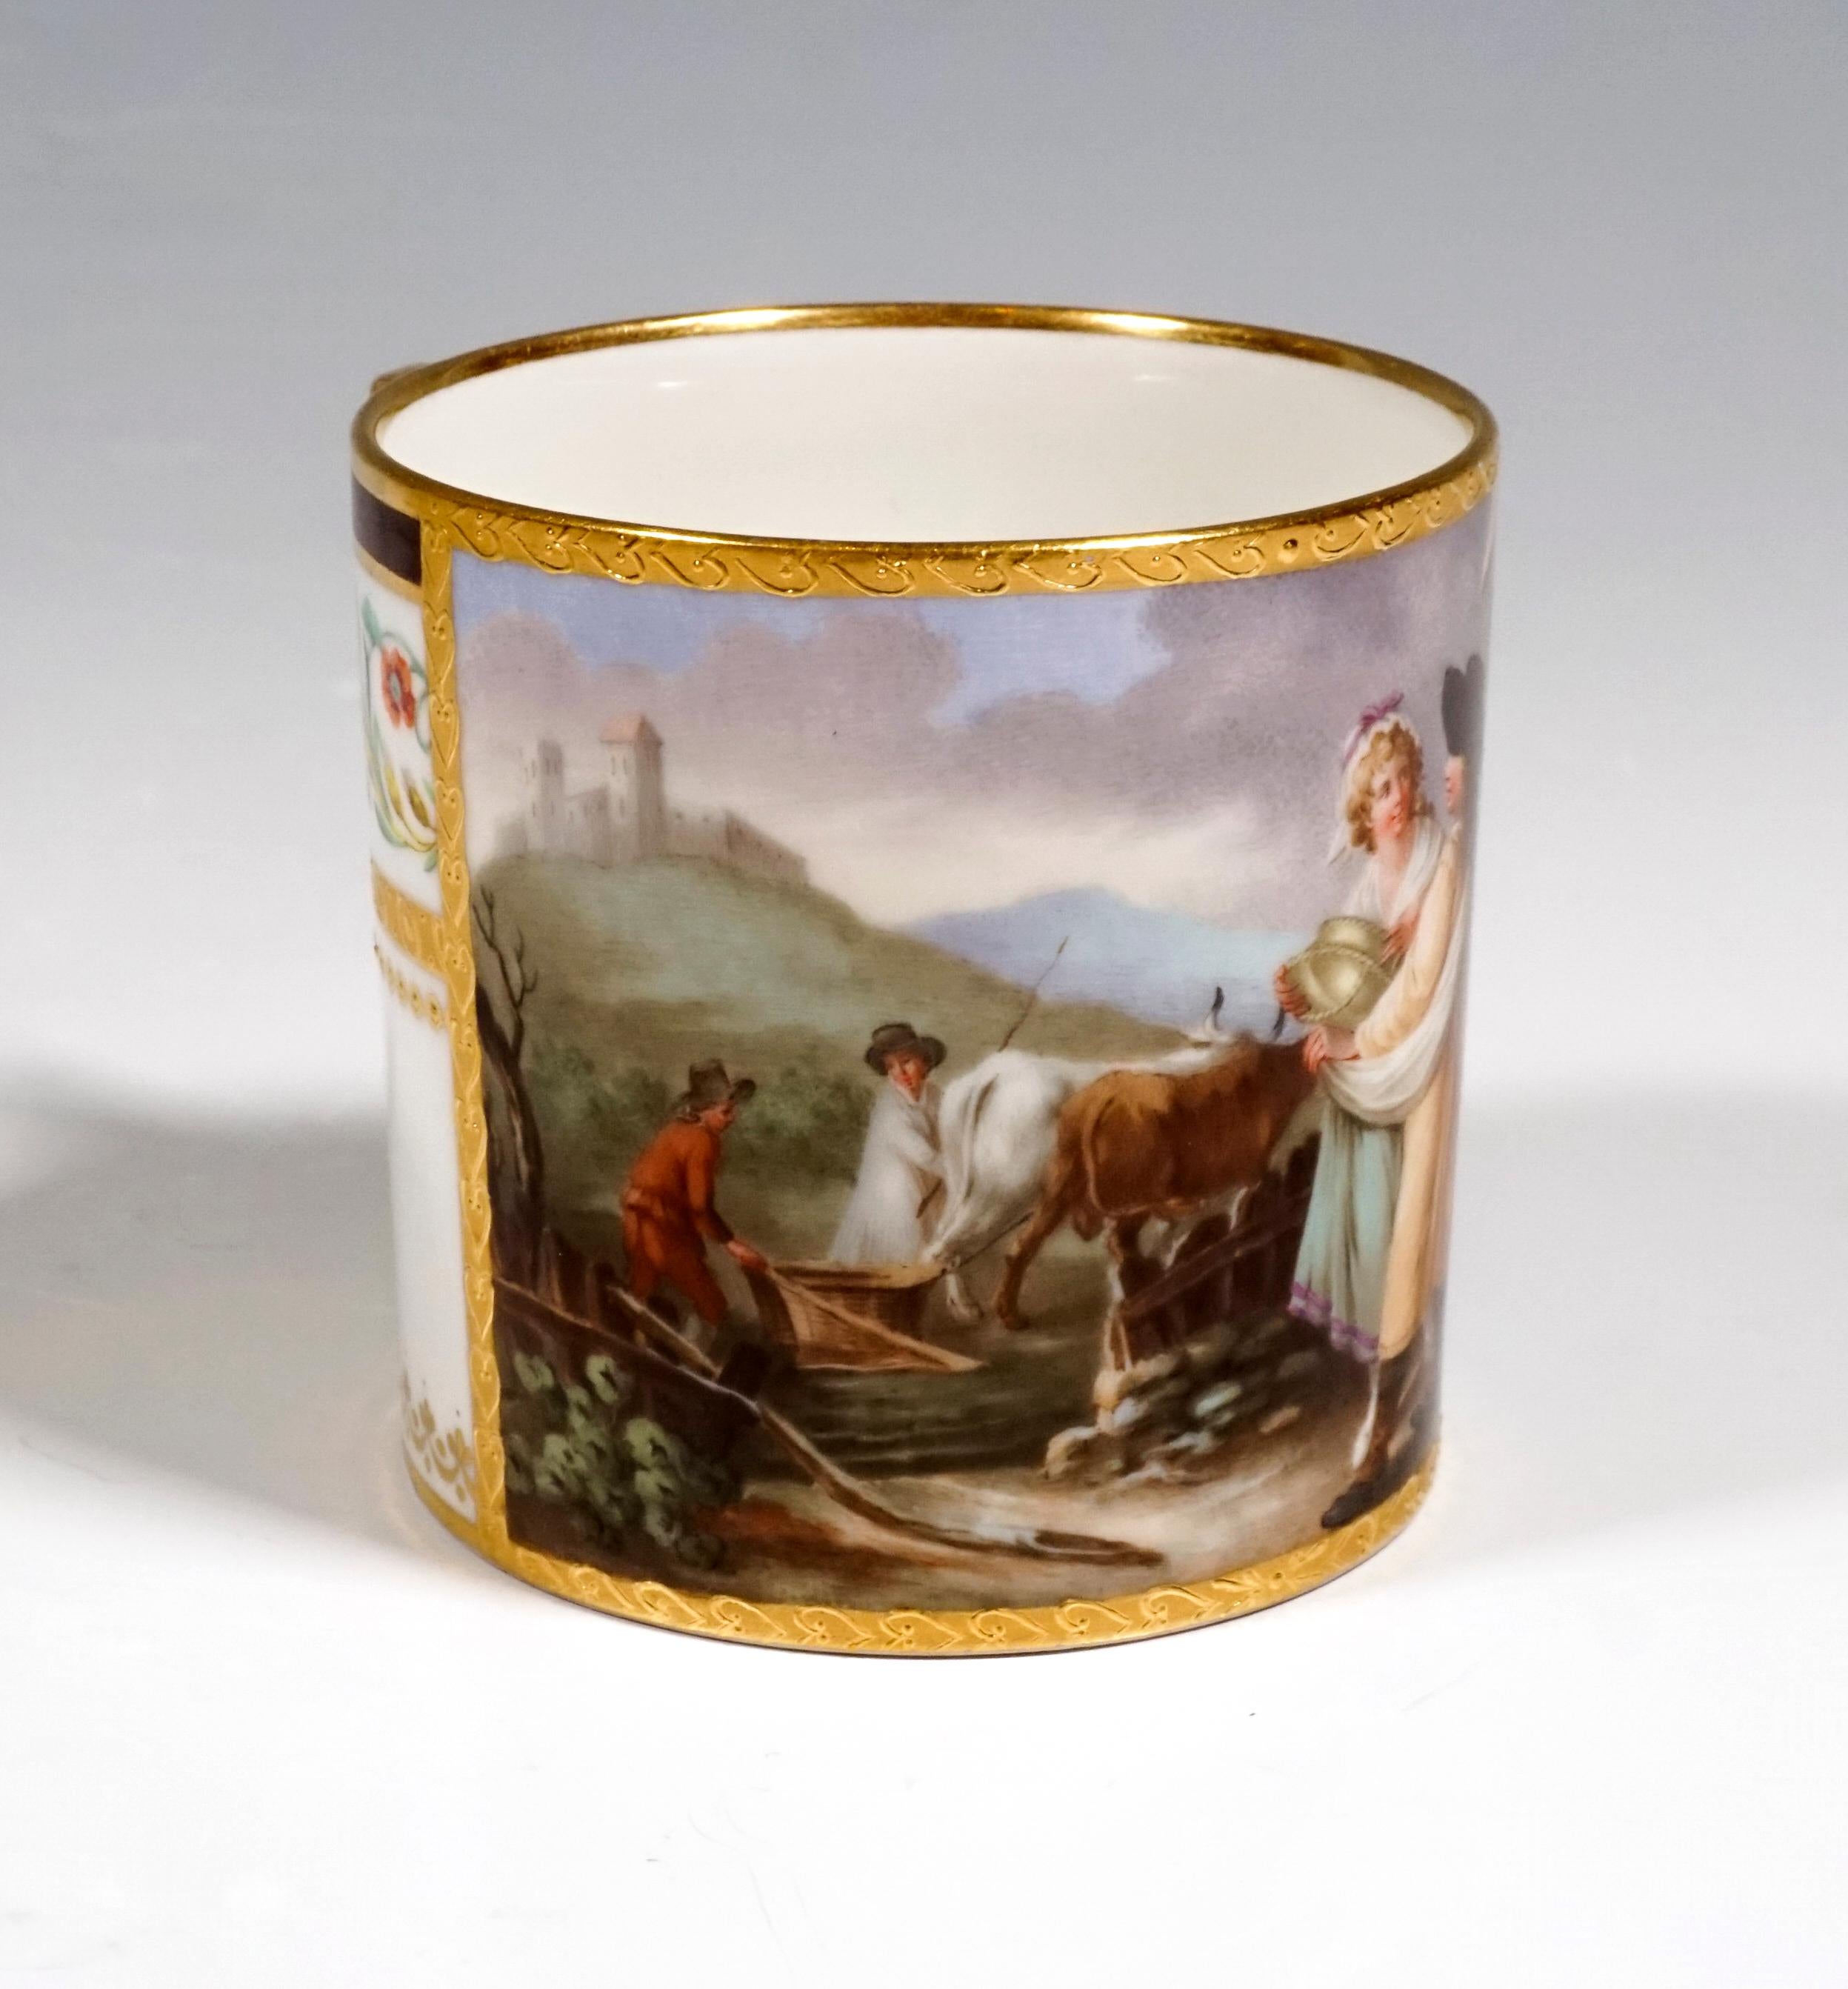 Romantic Viennese Imperial Porcelain Collecting Cup with Genre Scene, Sorgenthal, 1801